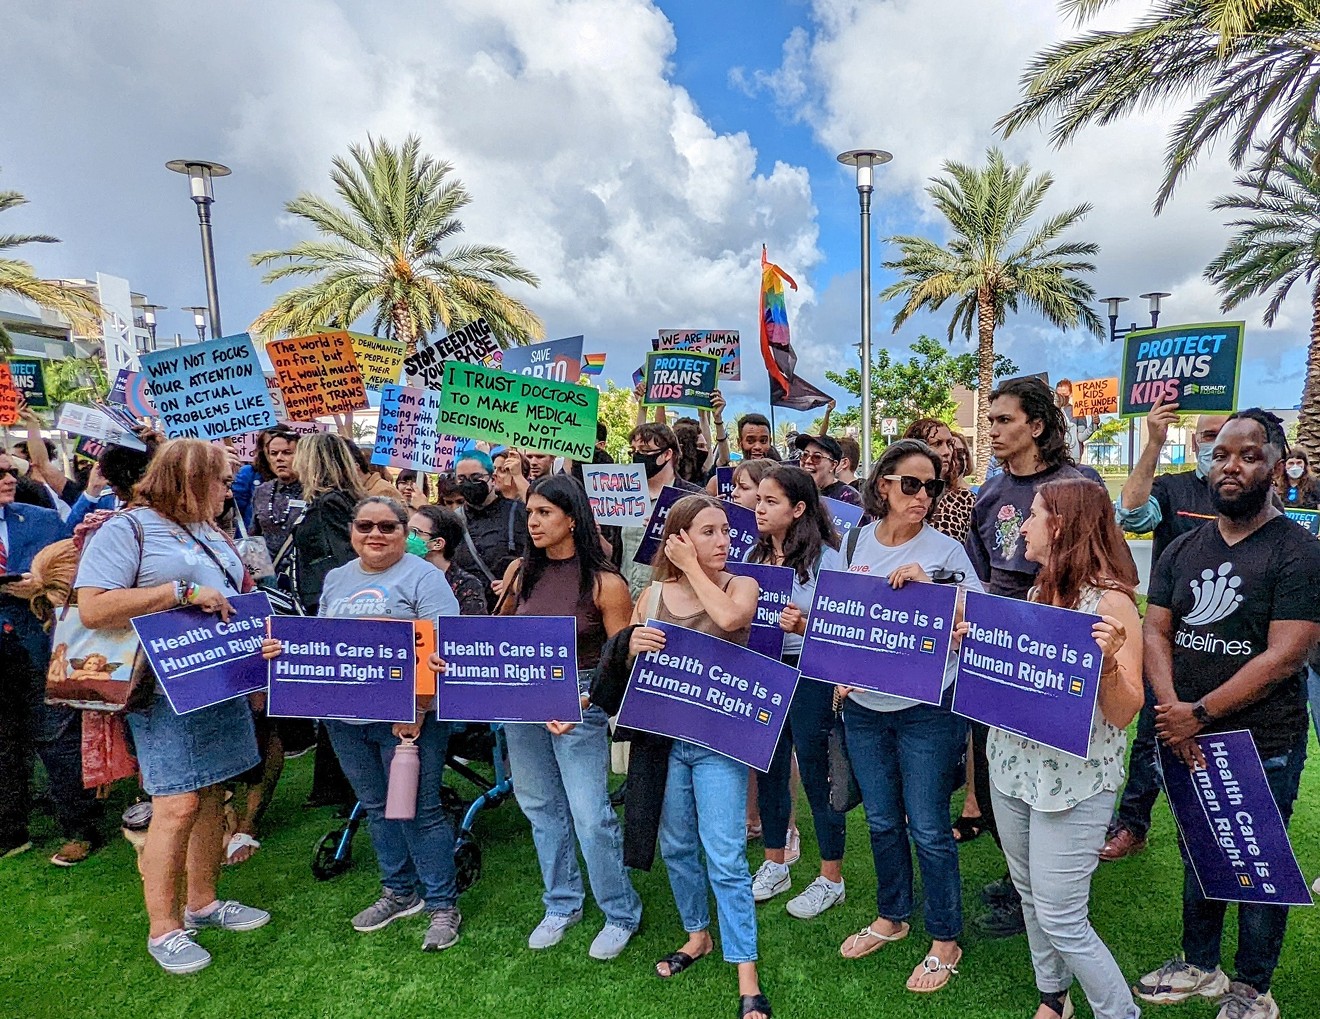 Protesters gather outside the Marriott Fort Lauderdale Airport hotel where the Florida Board of Medicine held a meeting on August 5, 2022 to consider proposed rules to ban gender-affirming medical care for minors.